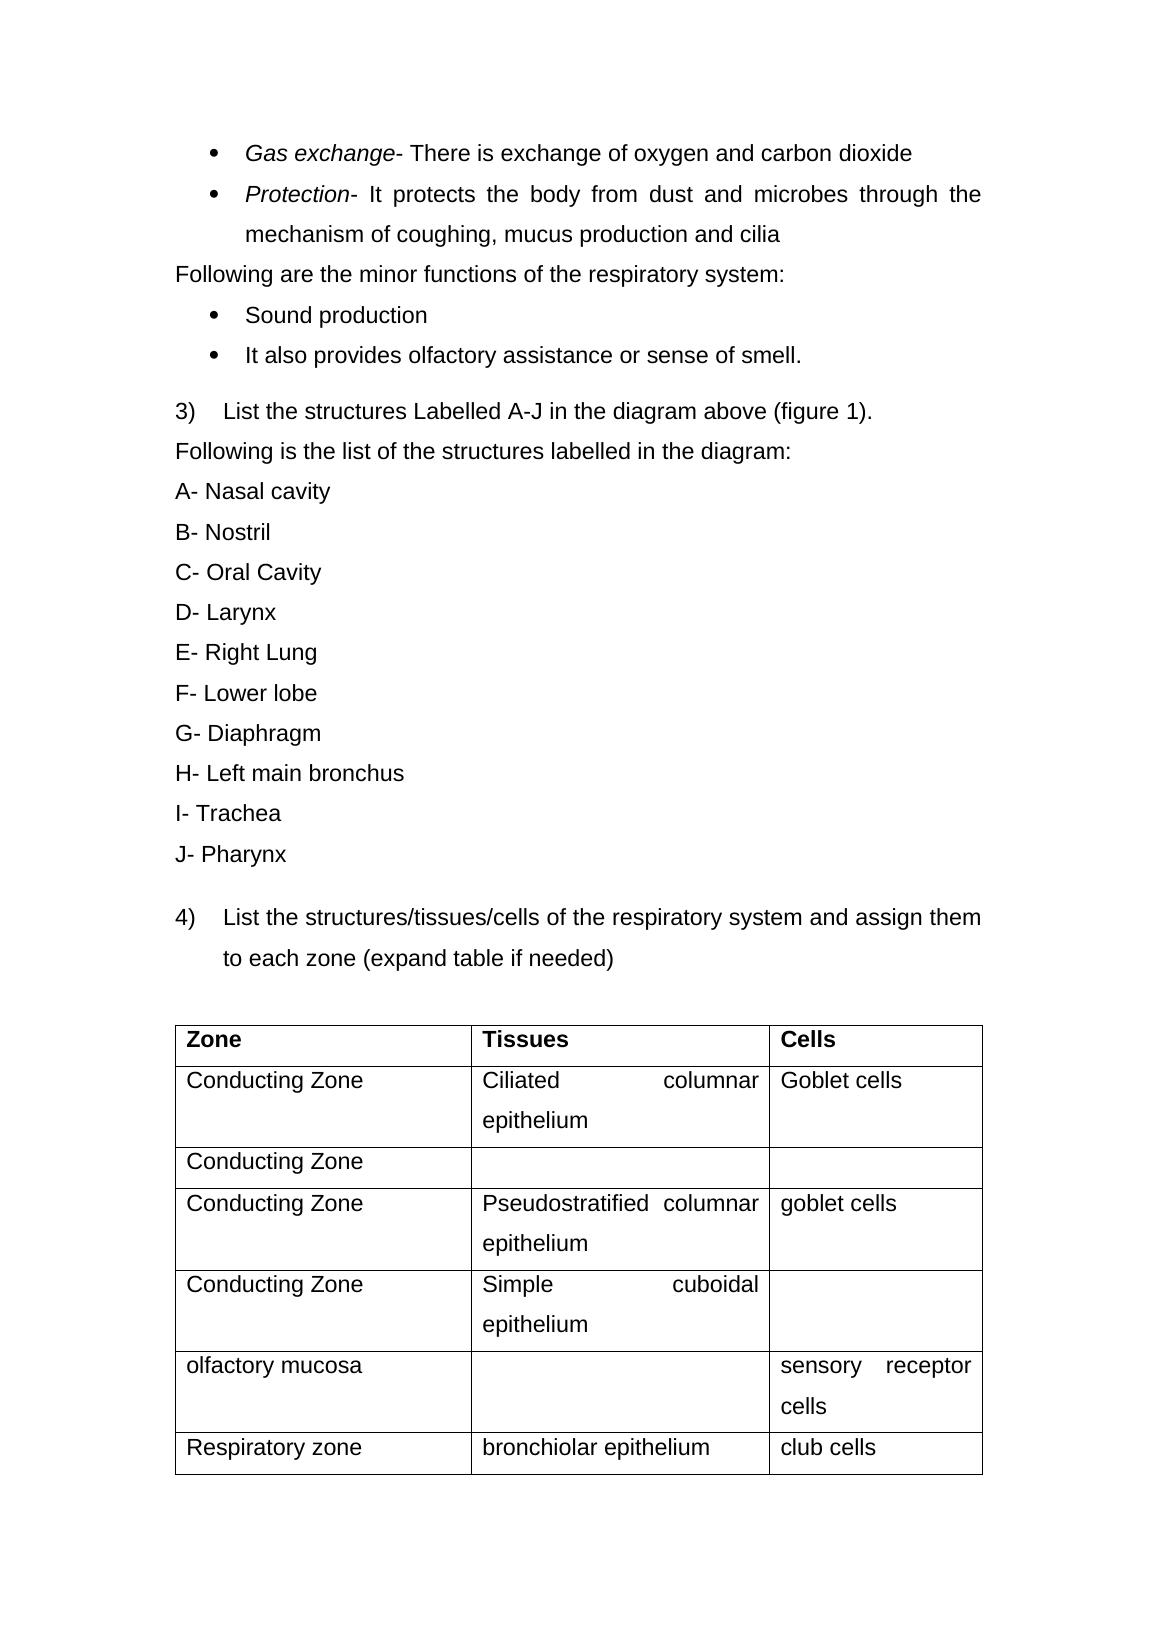 Fundamentals of Human Anatomy and Physiology: Respiratory System Worksheet_2